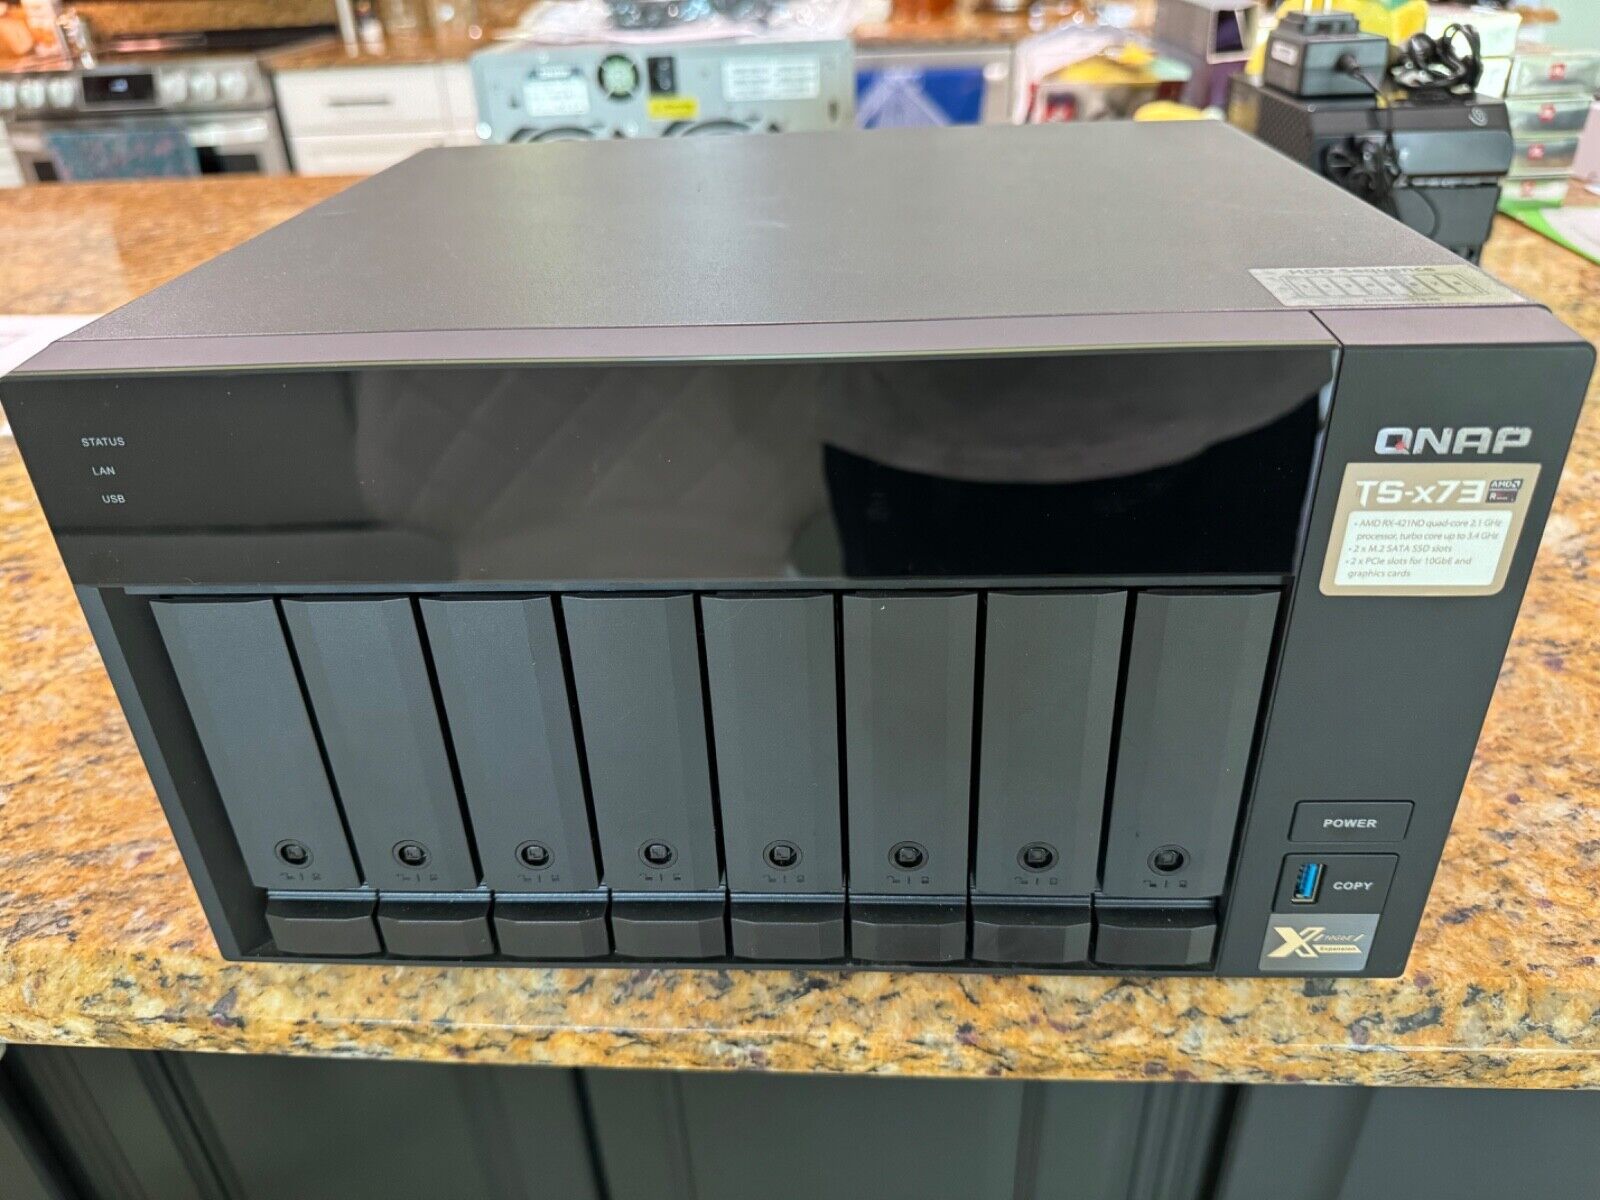 QNAP TS-873 8-bay network attached storage - 2 years old - excellent condition